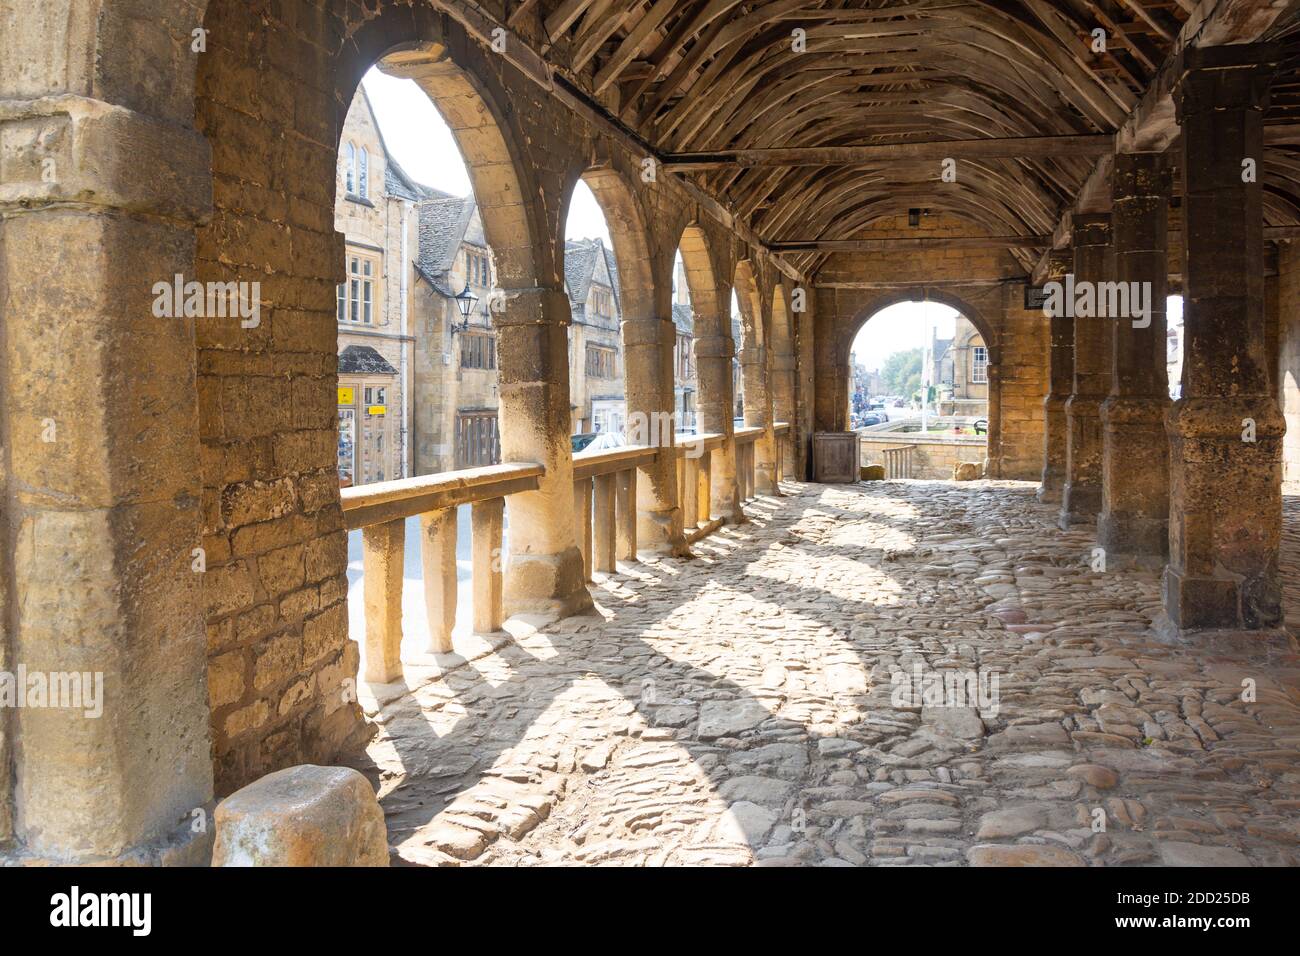 Medieval Market Hall, High Street, Chipping Campden, Gloucestershire, Angleterre, Royaume-Uni Banque D'Images